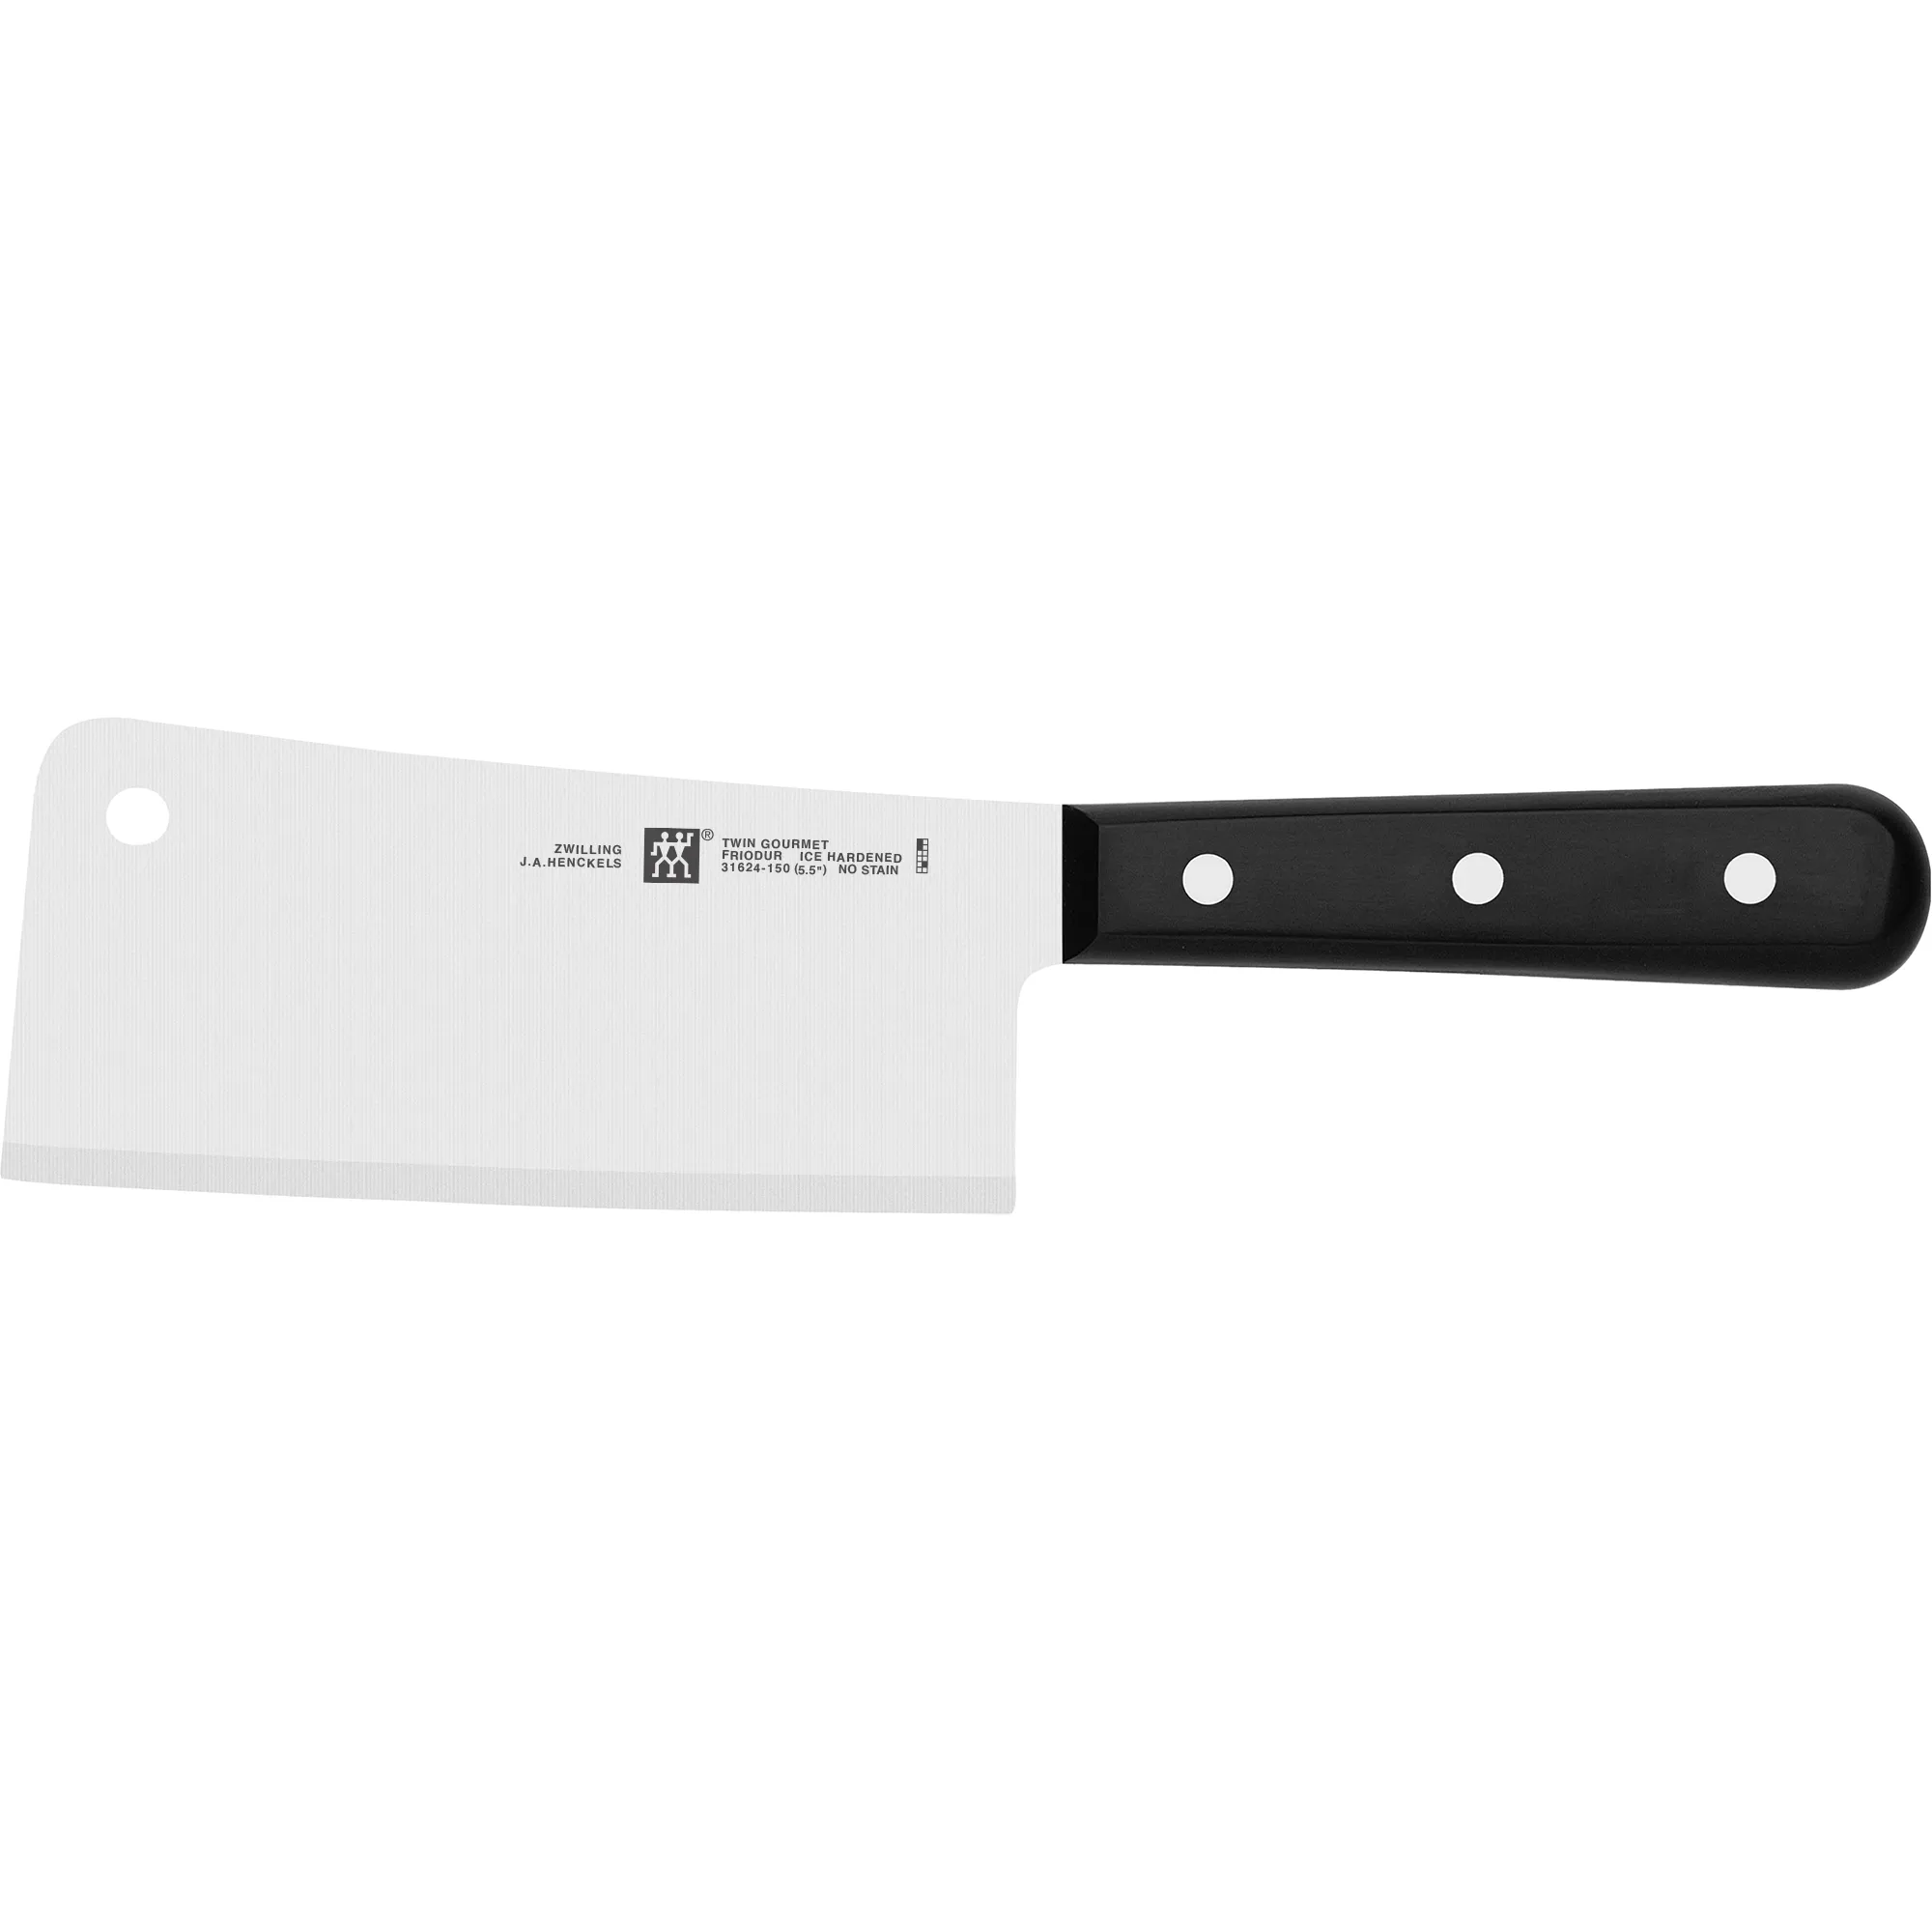 https://www.homethreads.com/files/zwilling/31624-150-zwilling-twin-gourmet-classic-5-12-inch-meat-cleaver.webp